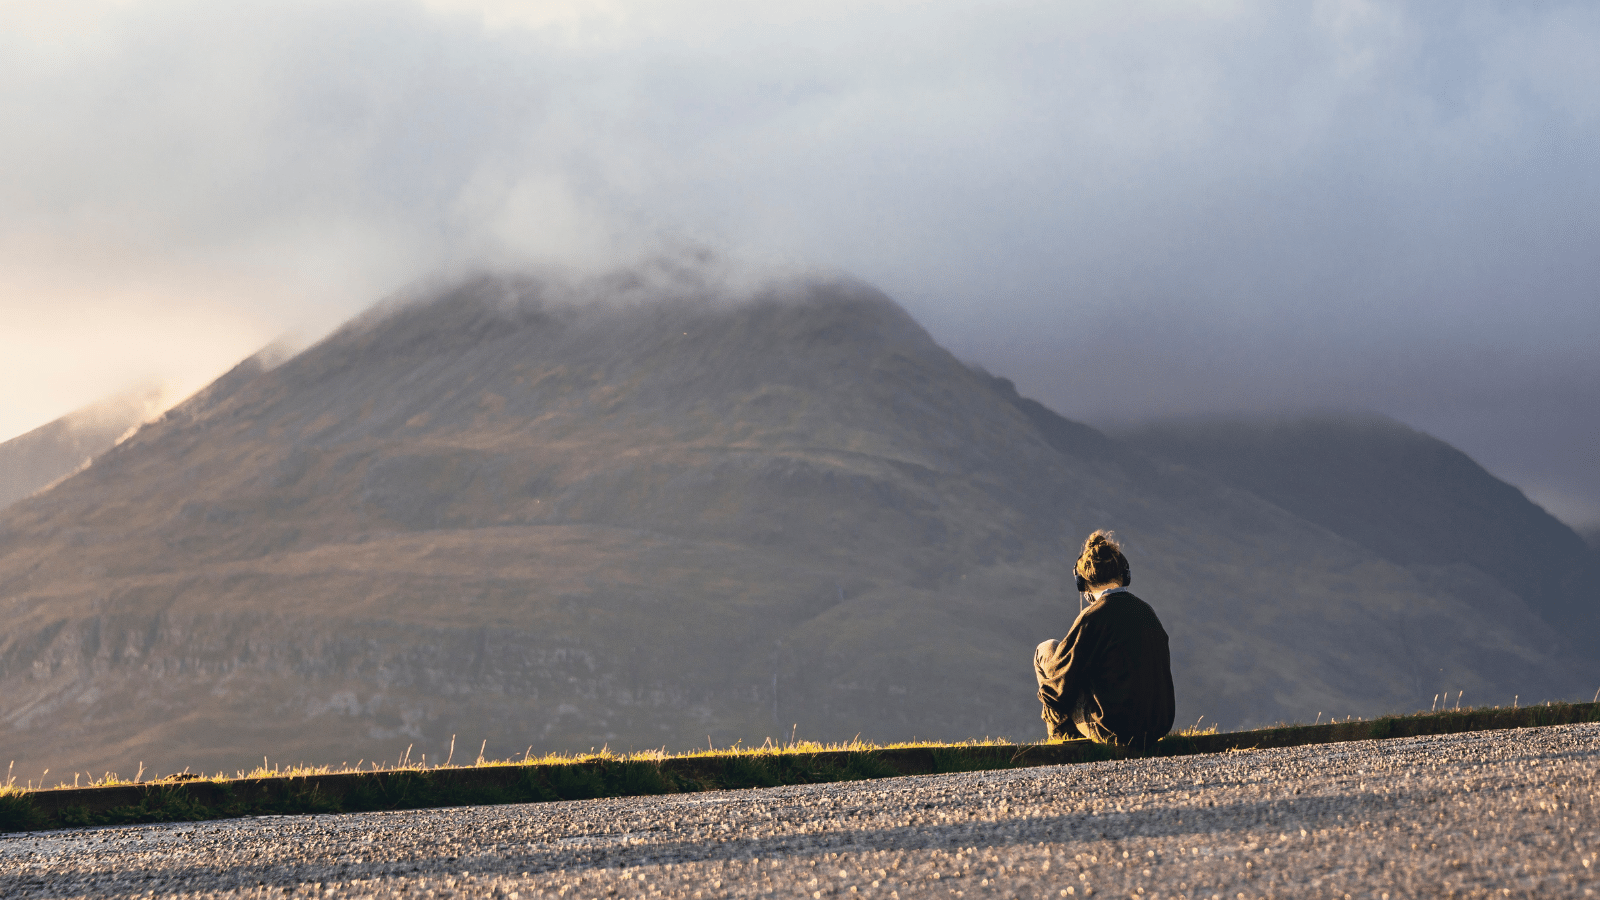 A person sits at the side of the road looking out over a hill that has clouds nestled at the top of it - they are wearing headphones